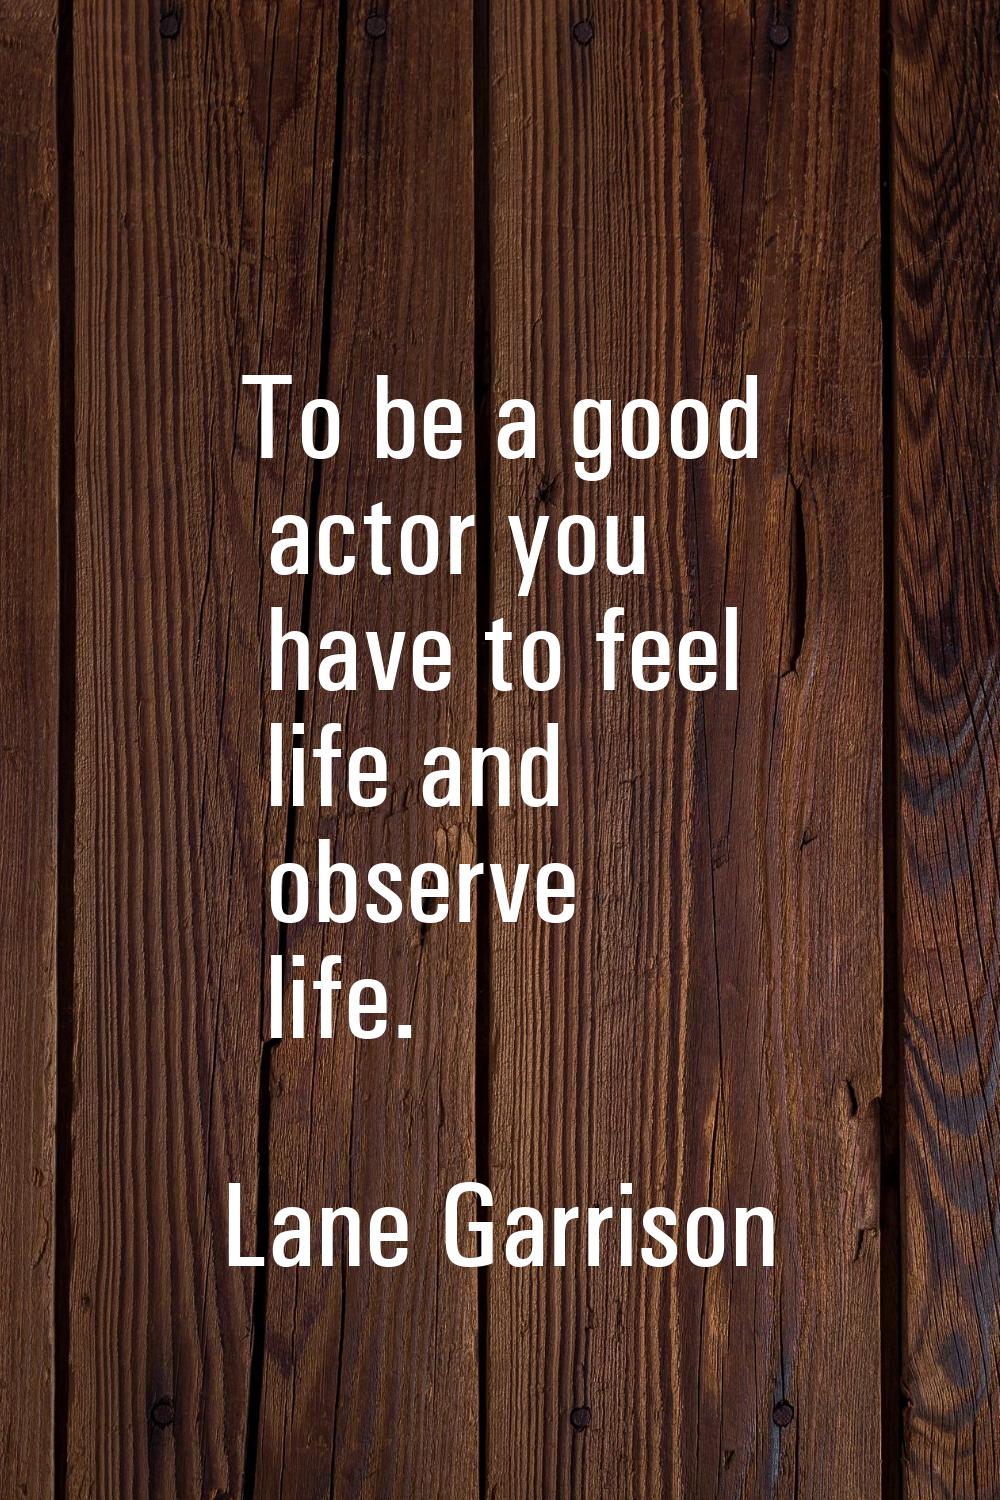 To be a good actor you have to feel life and observe life.